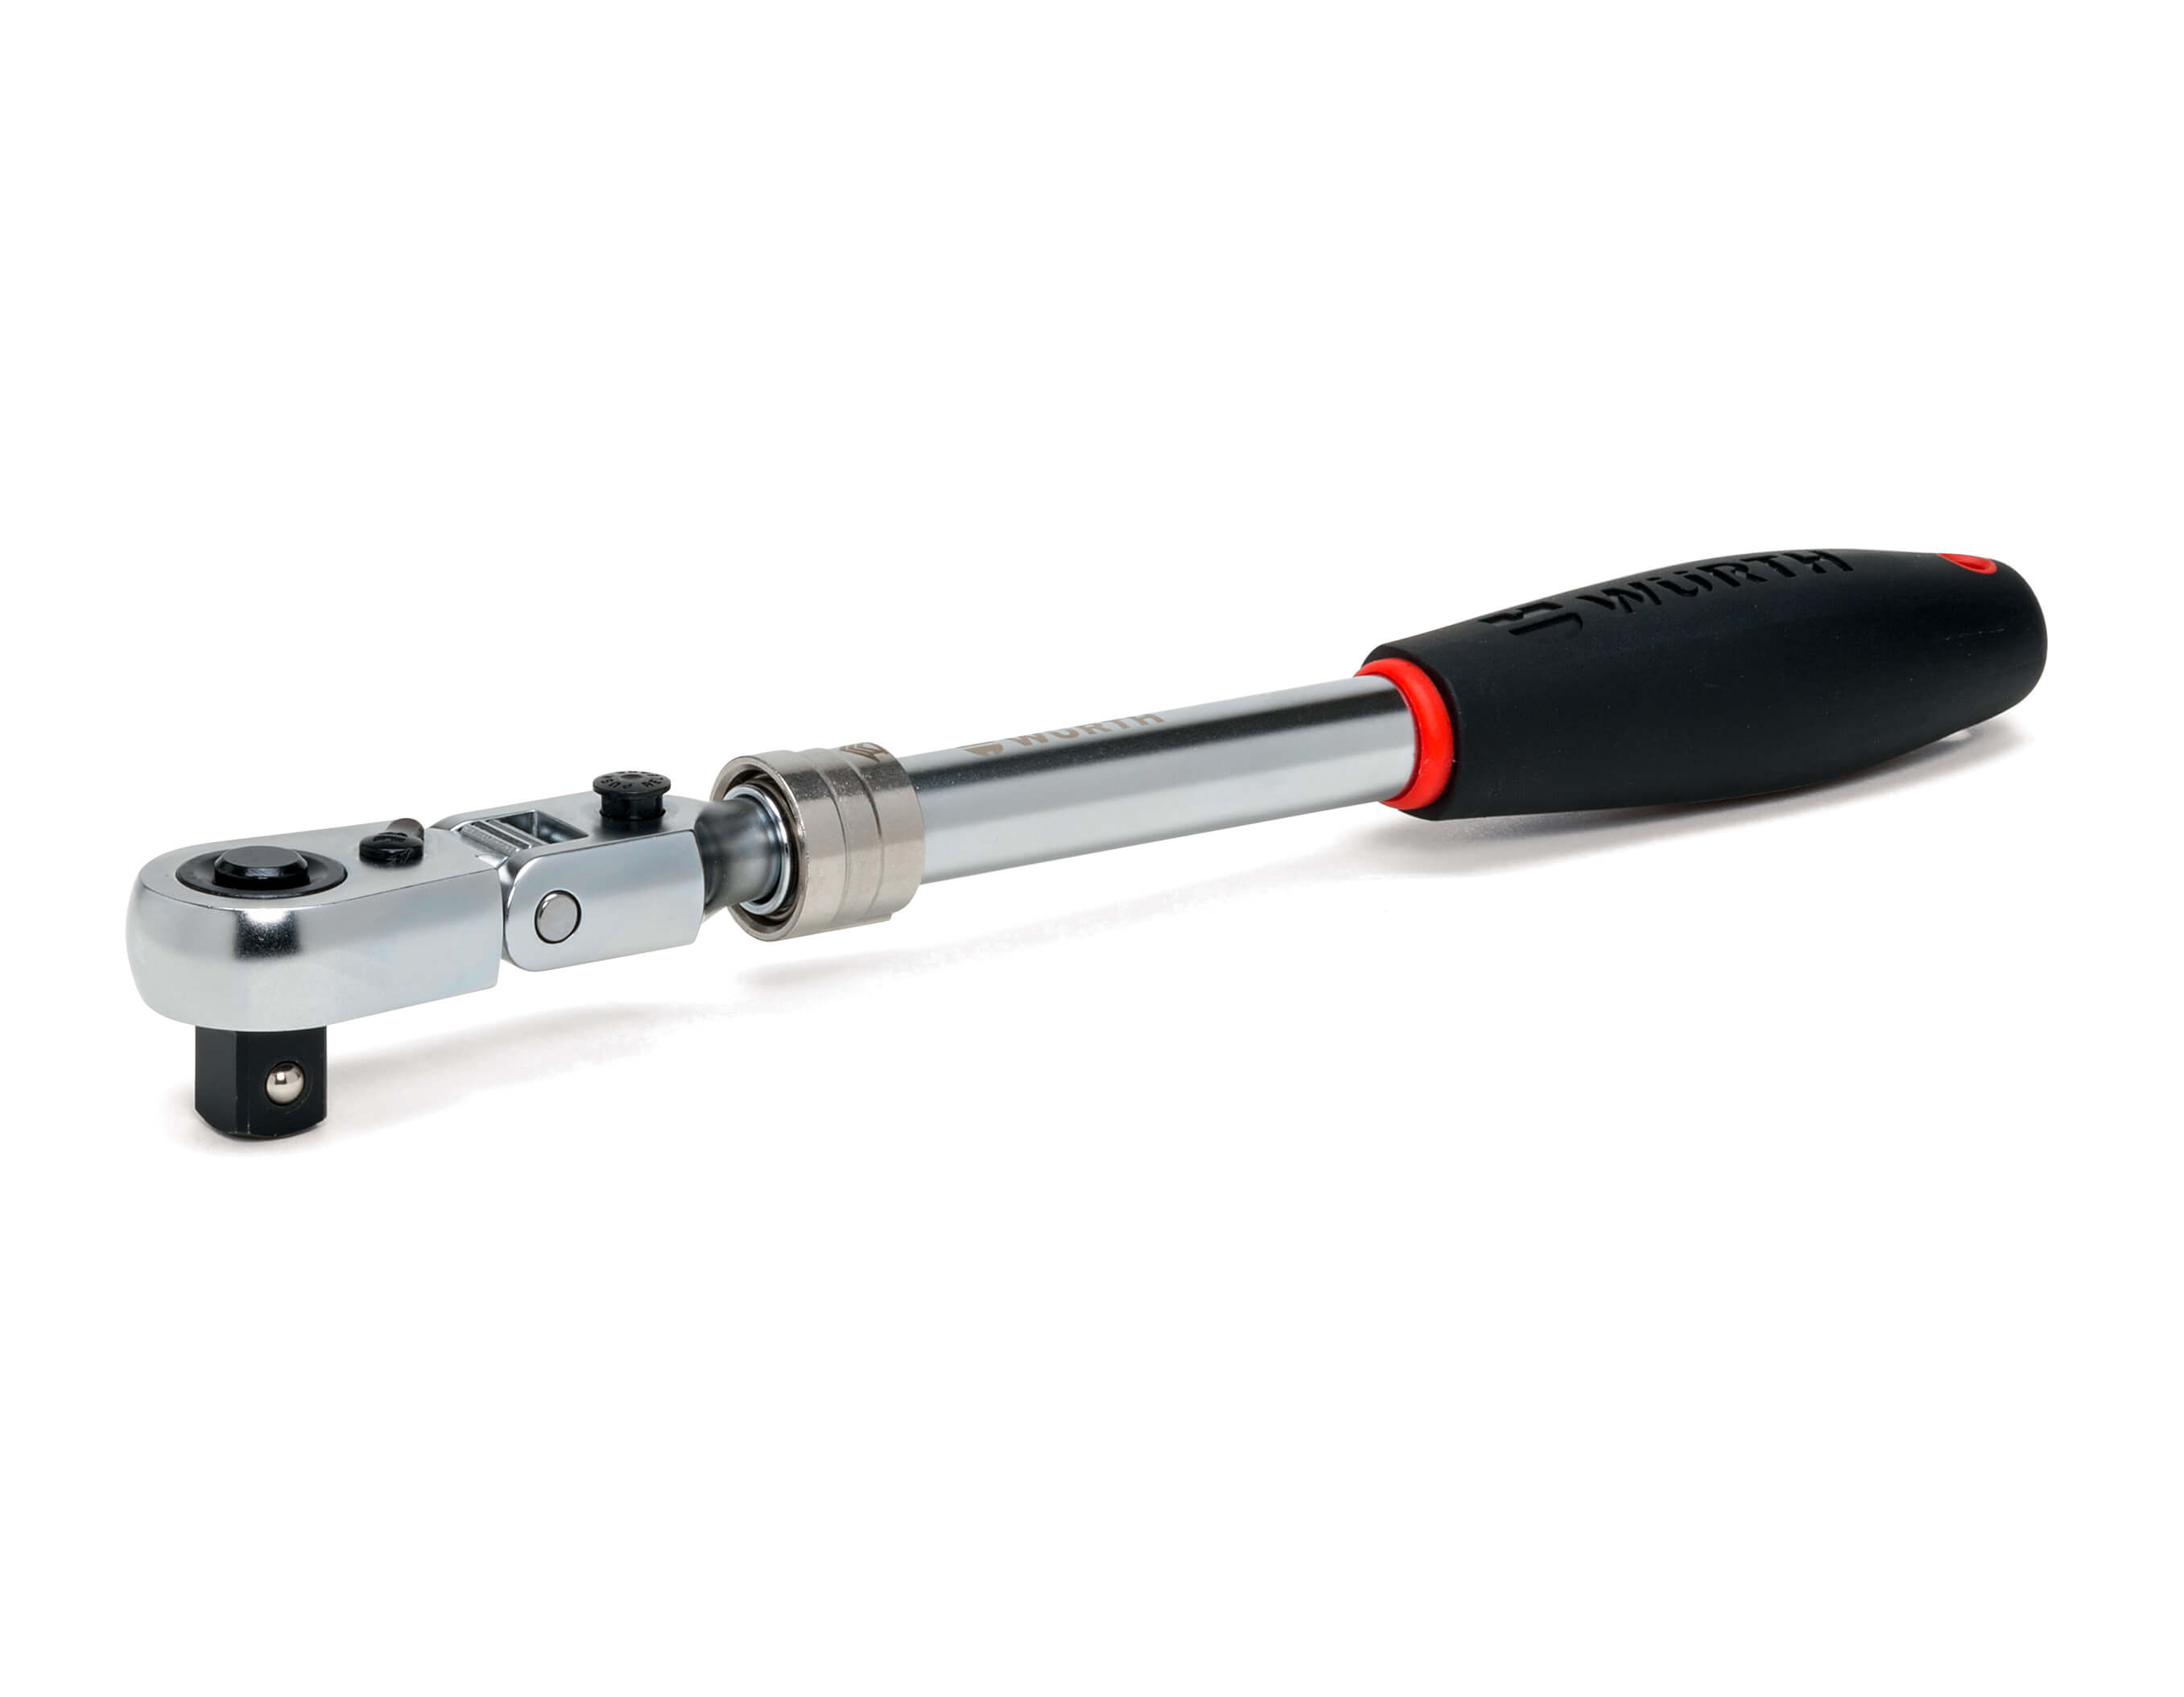 1/2 inch jointed-head ratchet-extendable